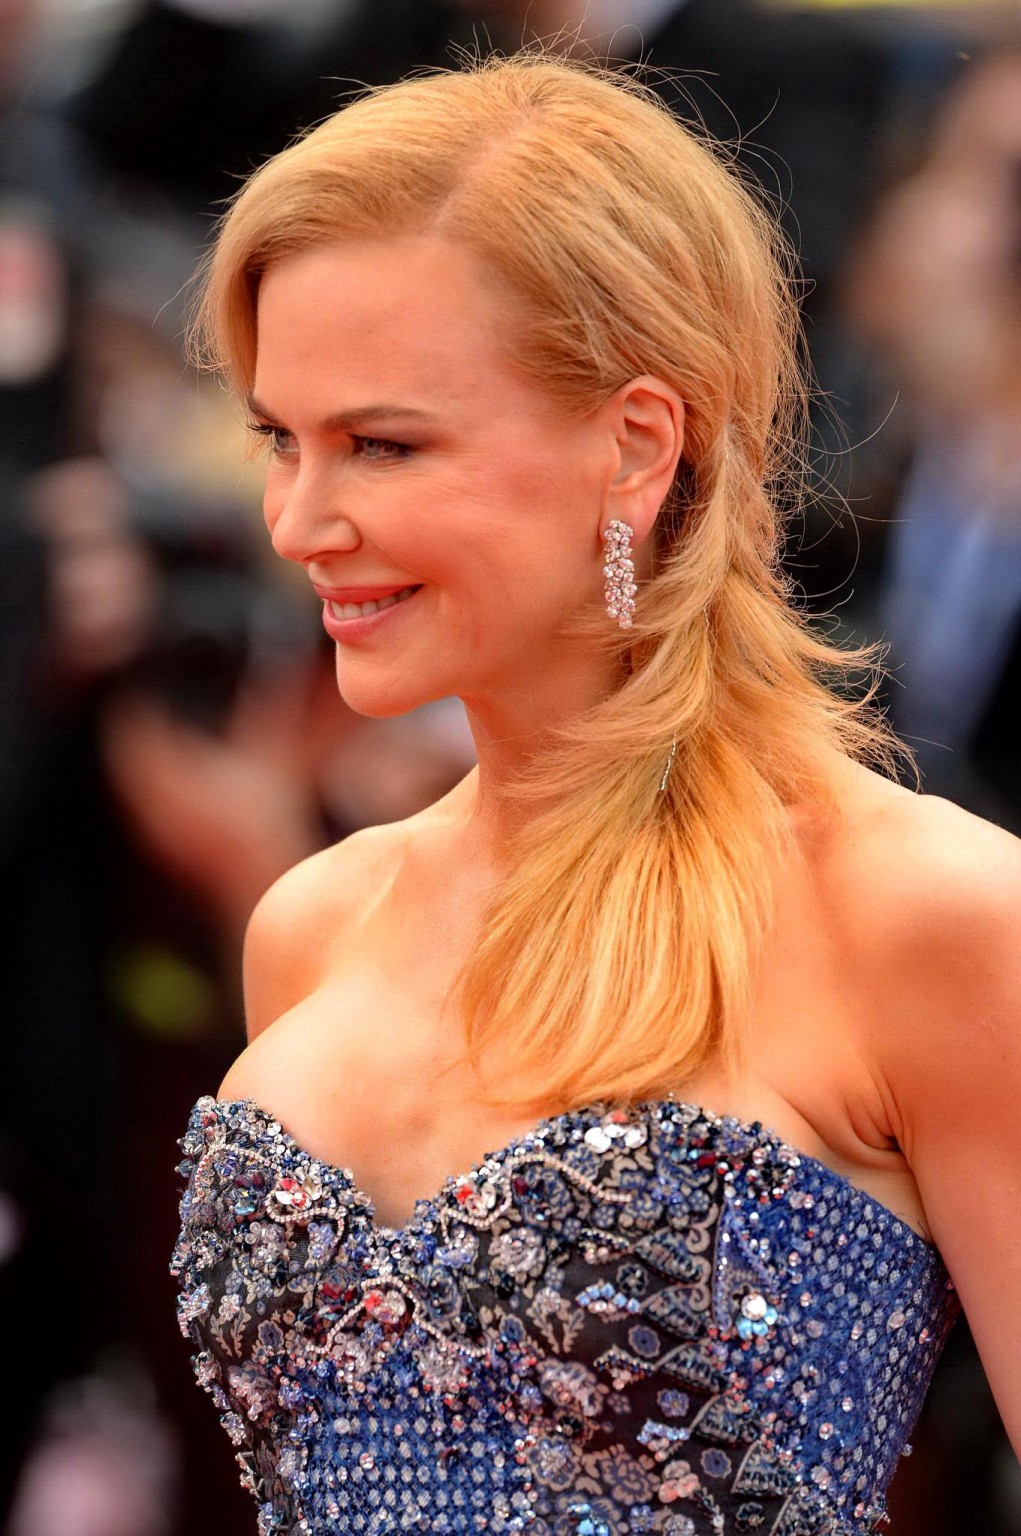 Nicole Kidman busty wearing a strapless dress at the 67th Annual Cannes Film Fes #75196228